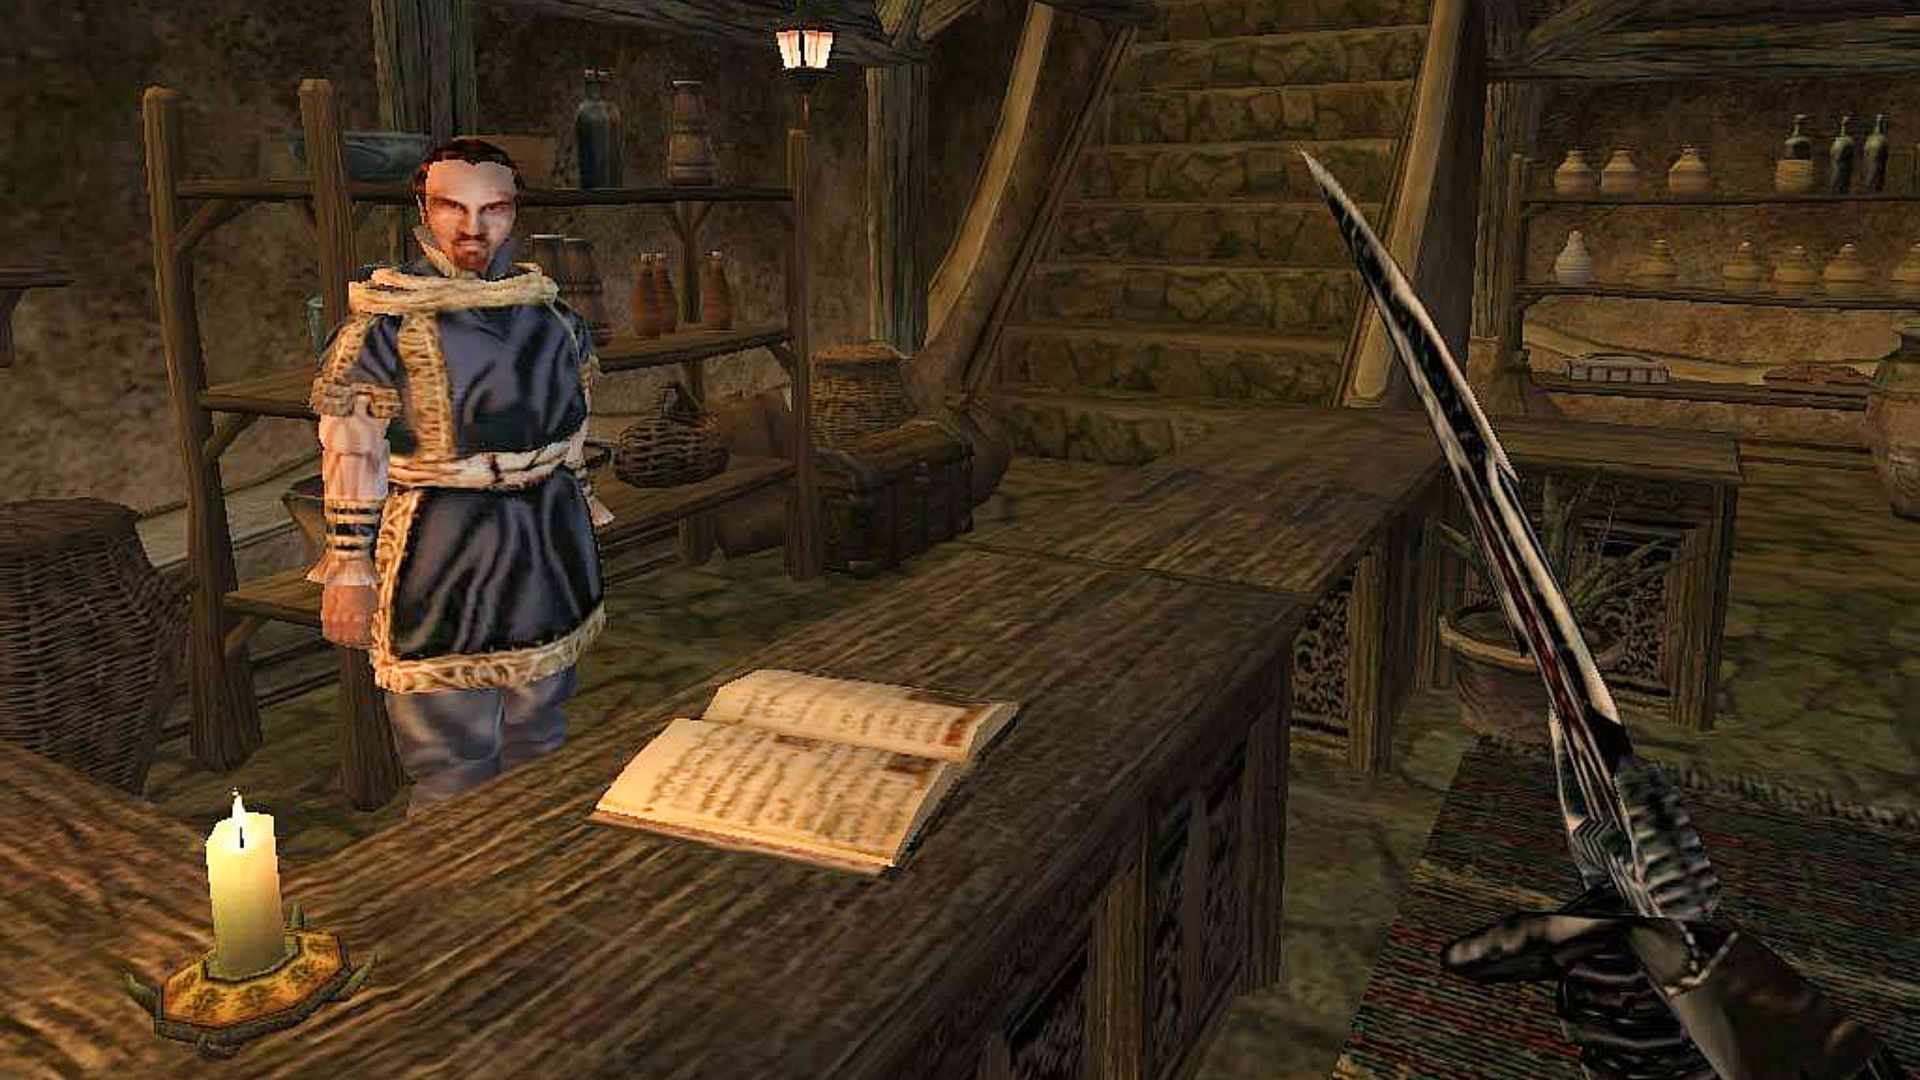 Older Elder Scrolls Games are now free to play on Steam